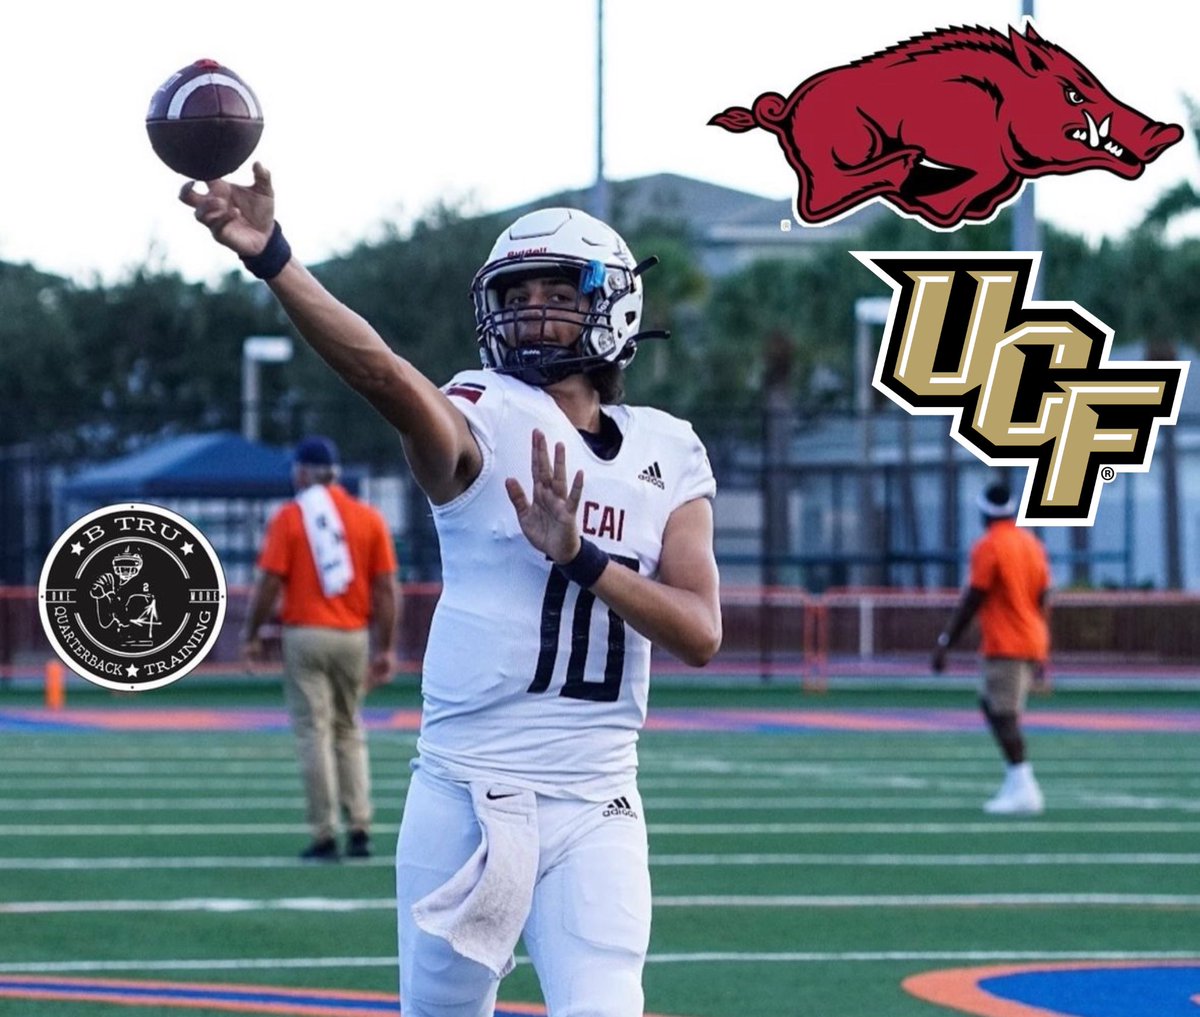 🚨🚨QB TRAINEE OFFER ALERT🚨🚨

2027 QB Trainee: @joaquinkav10 (Tarpon Springs) has received his 2nd POWER 4 OFFER today from the University of CENTRAL FLORIDA ⚔️⚡️  S/O to my guy @CoachHinshaw #BTruQBTraining 🔘 #ChargeOn

OFFERS: Arkansas & UCF